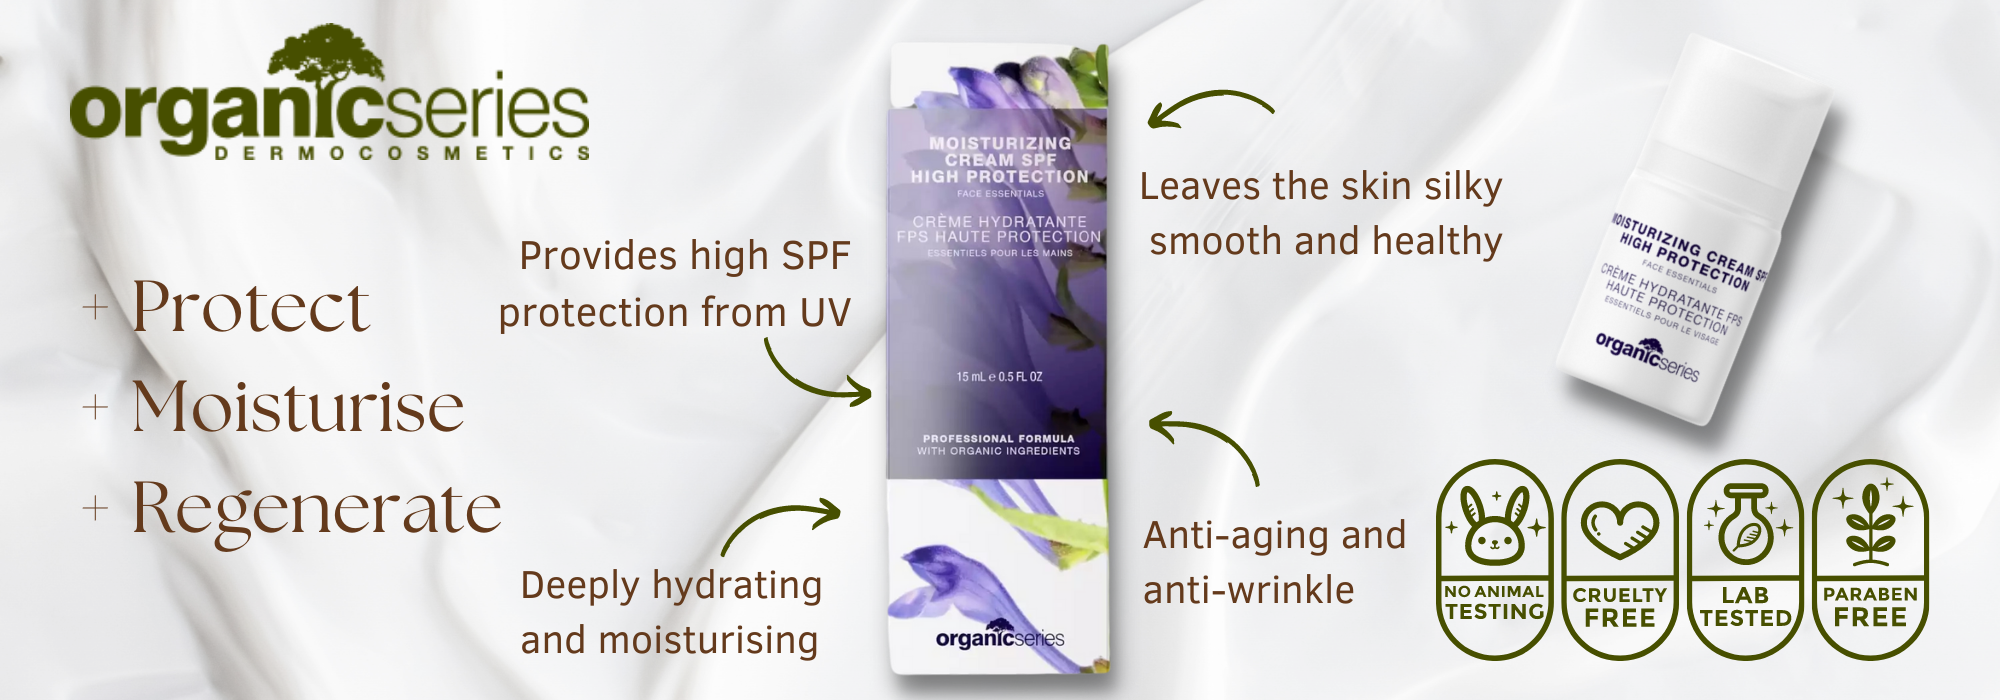 Skincare Organic Ingredients - 8 Amazing Facts You Need to Know face moisturiser with sunscreen spf40 by organic series moisturising cream forte high protection